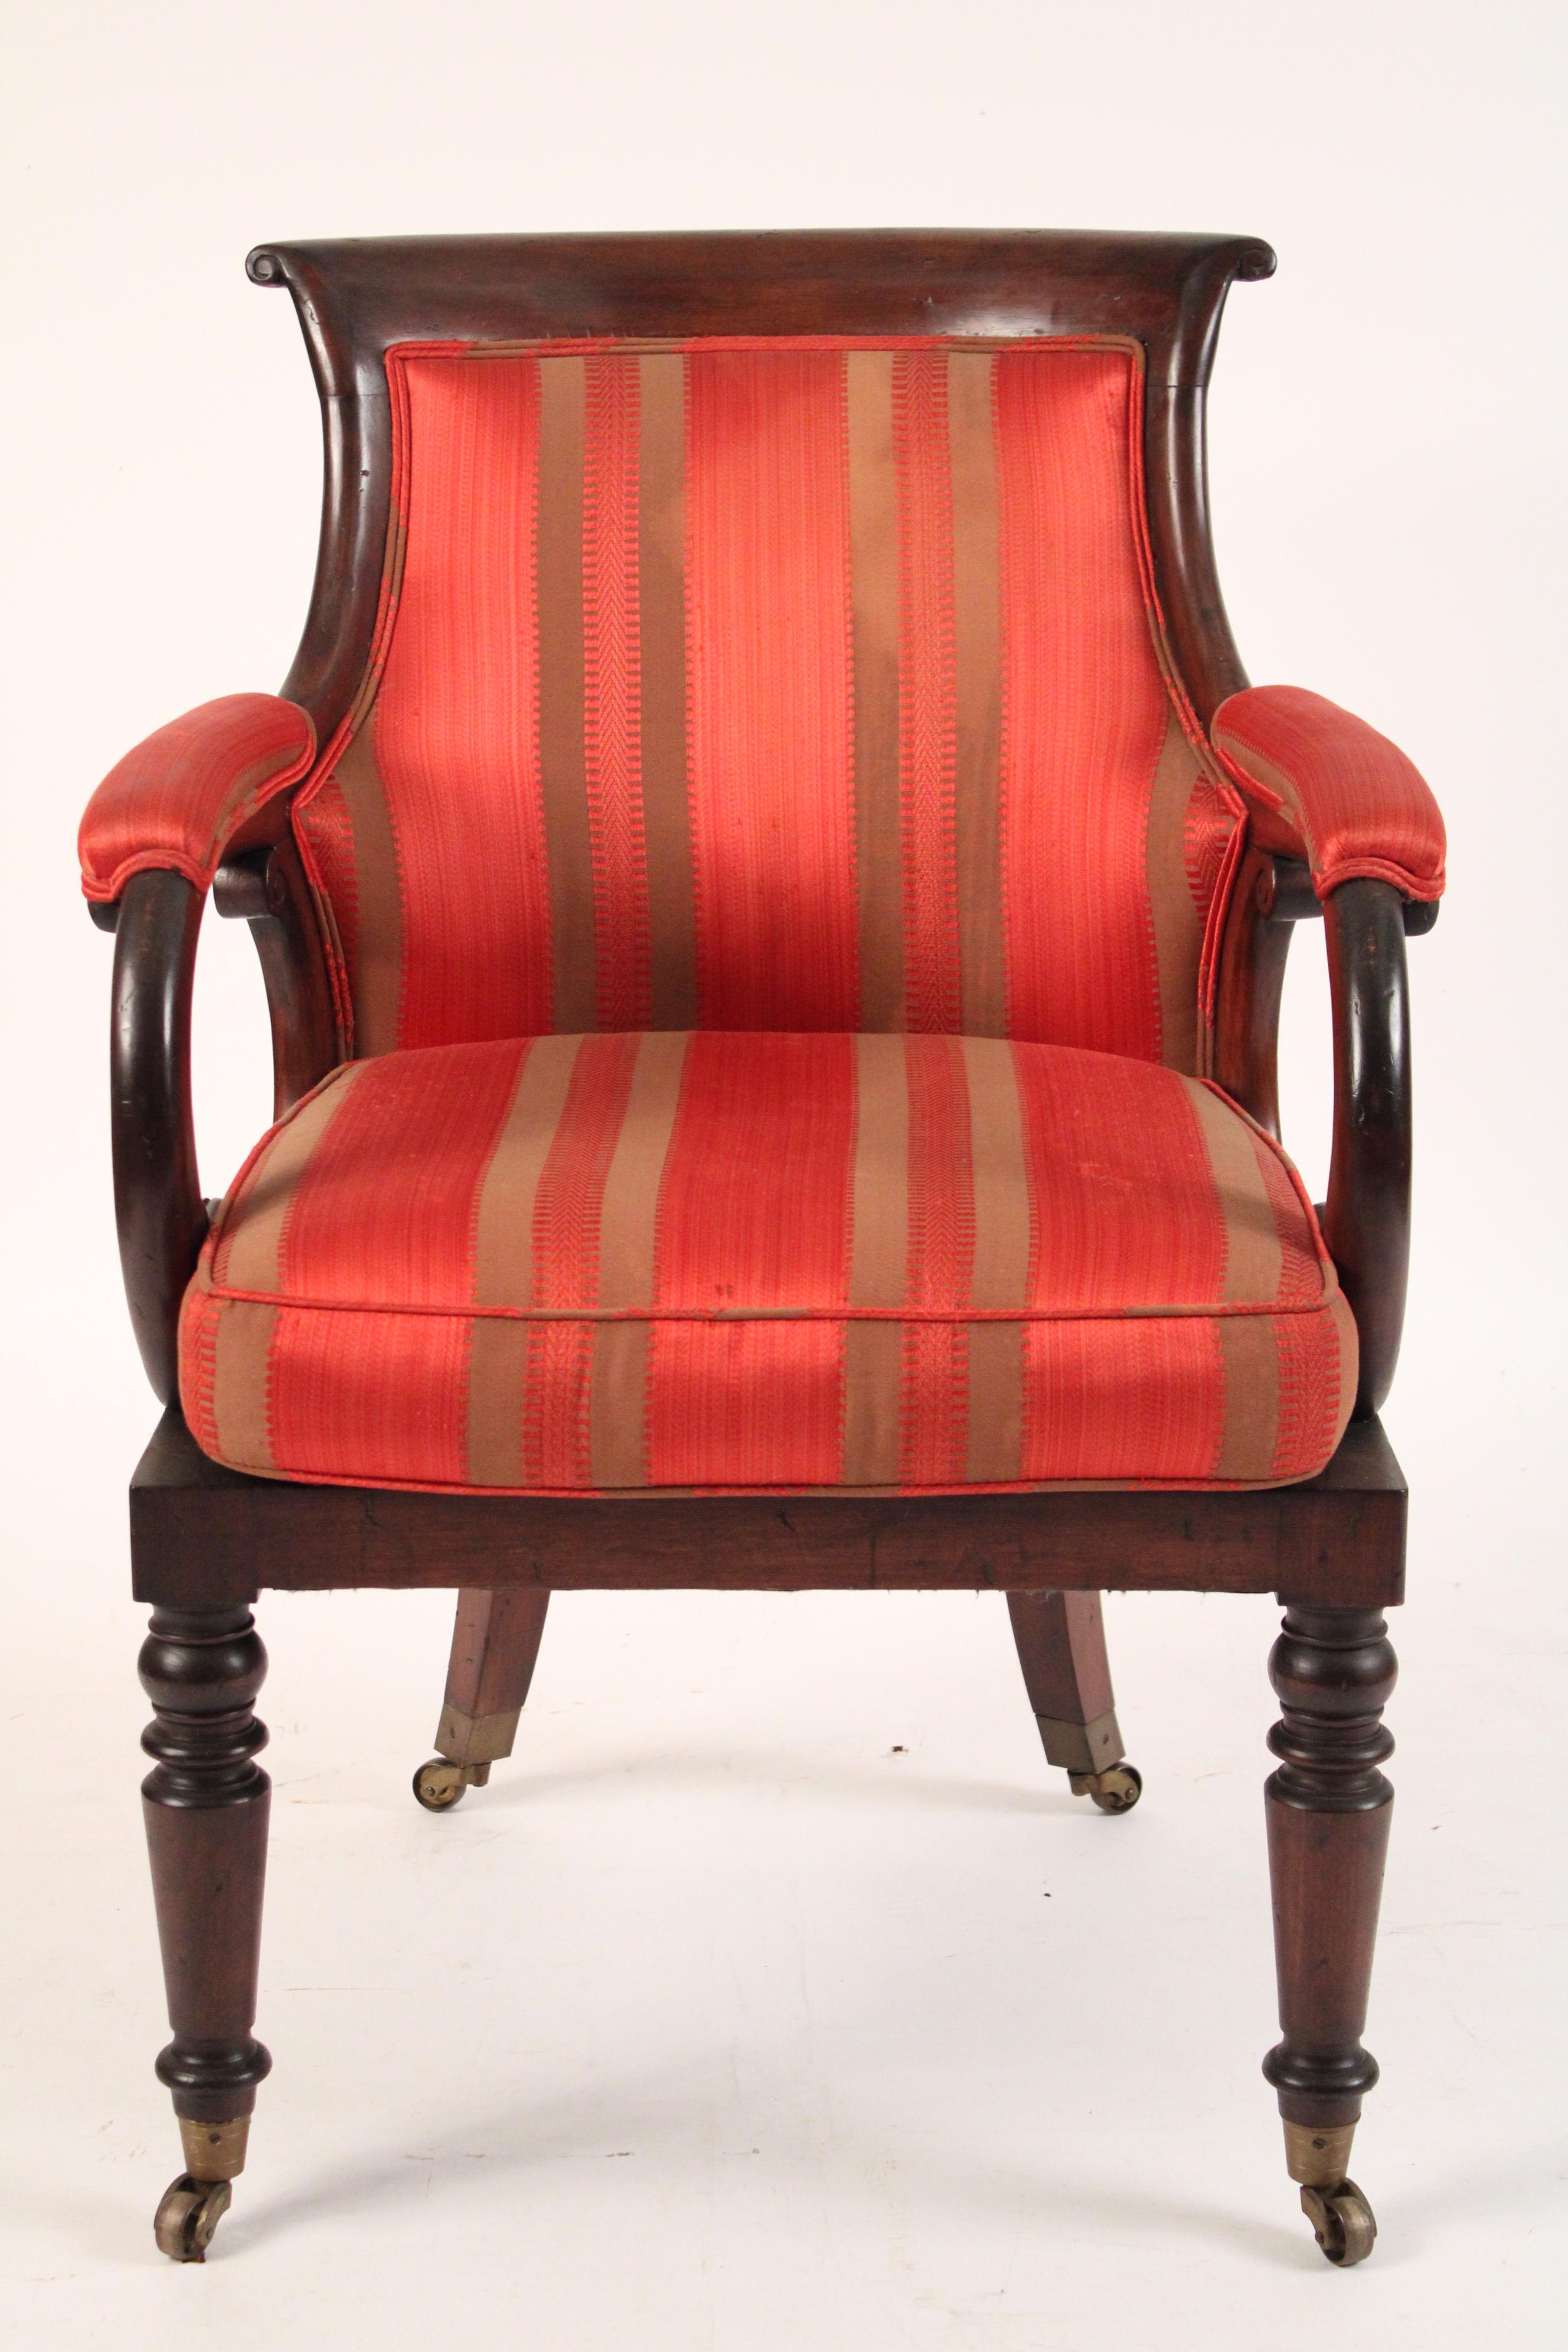 Napoleon III mahogany armchair, circa 1835. Concave shaped crest rail and back making this chair very comfortable, C scrolled arms, turned and tapered front legs ending in brass casters.